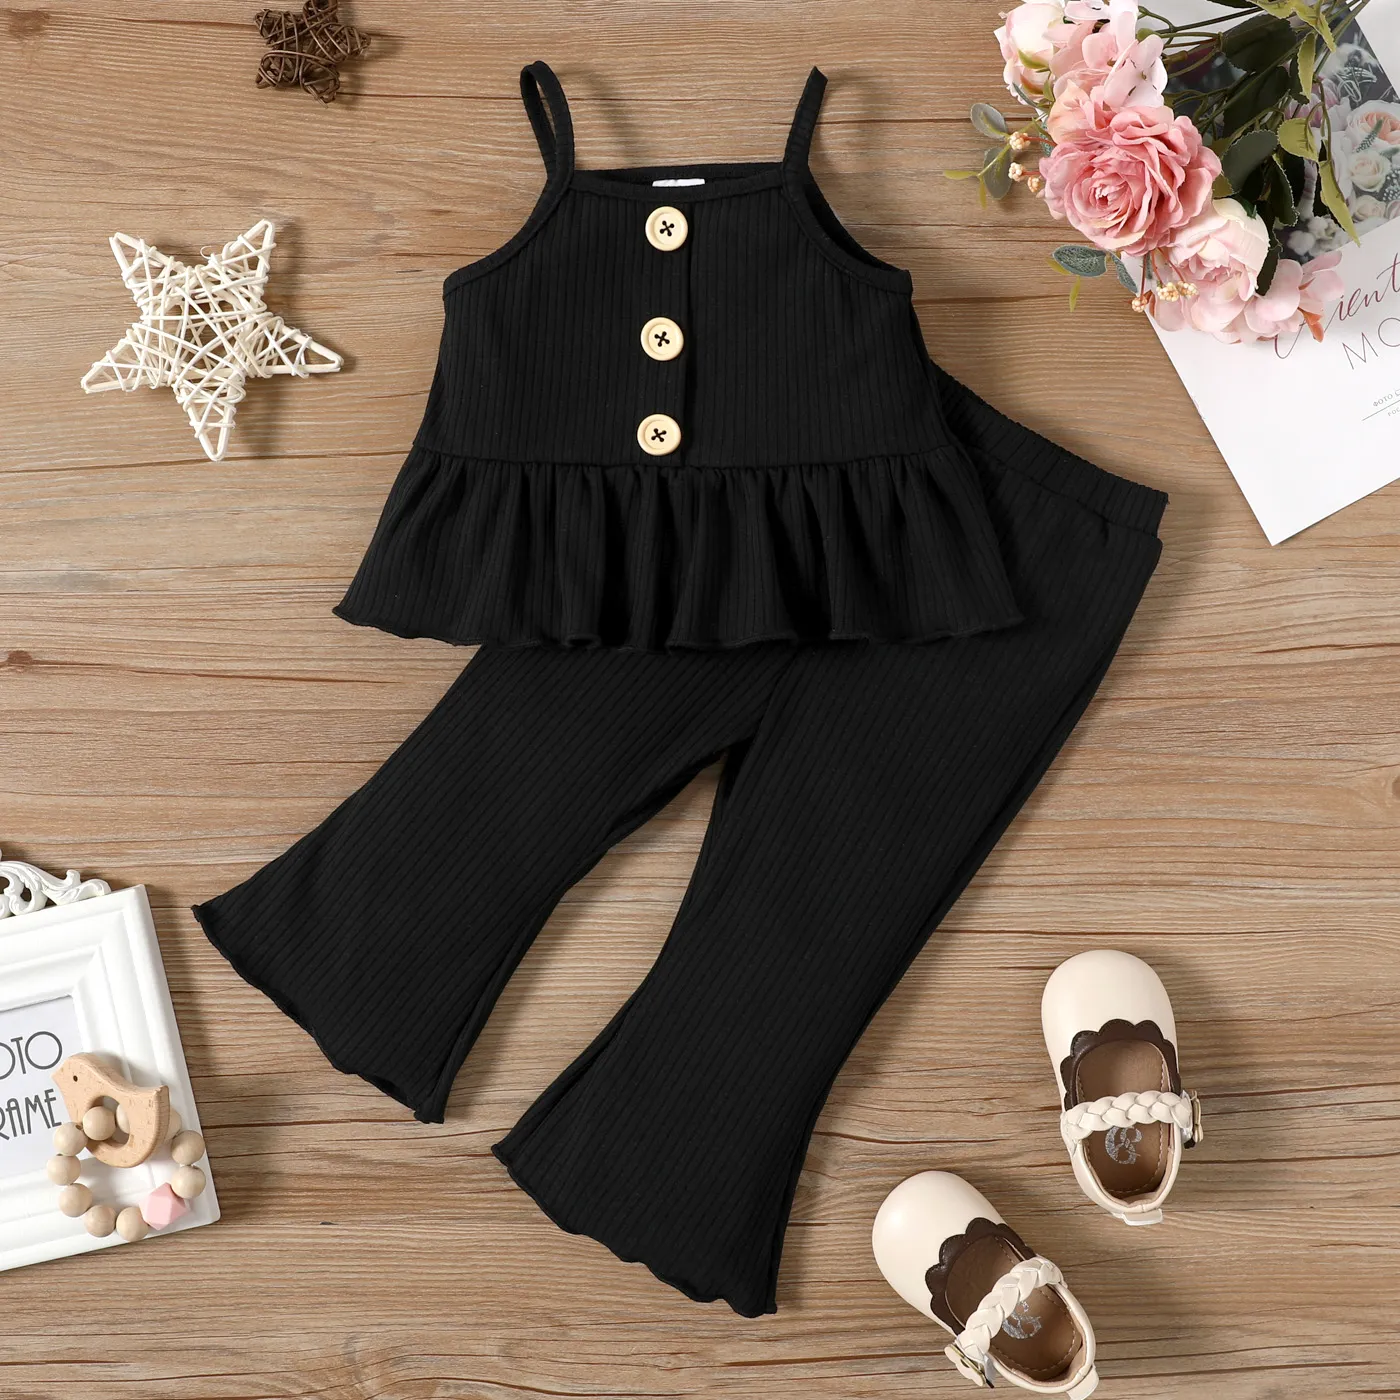 2pcs Baby Girl Solid Spaghetti Strap Peplum Top And Flared Pants Set